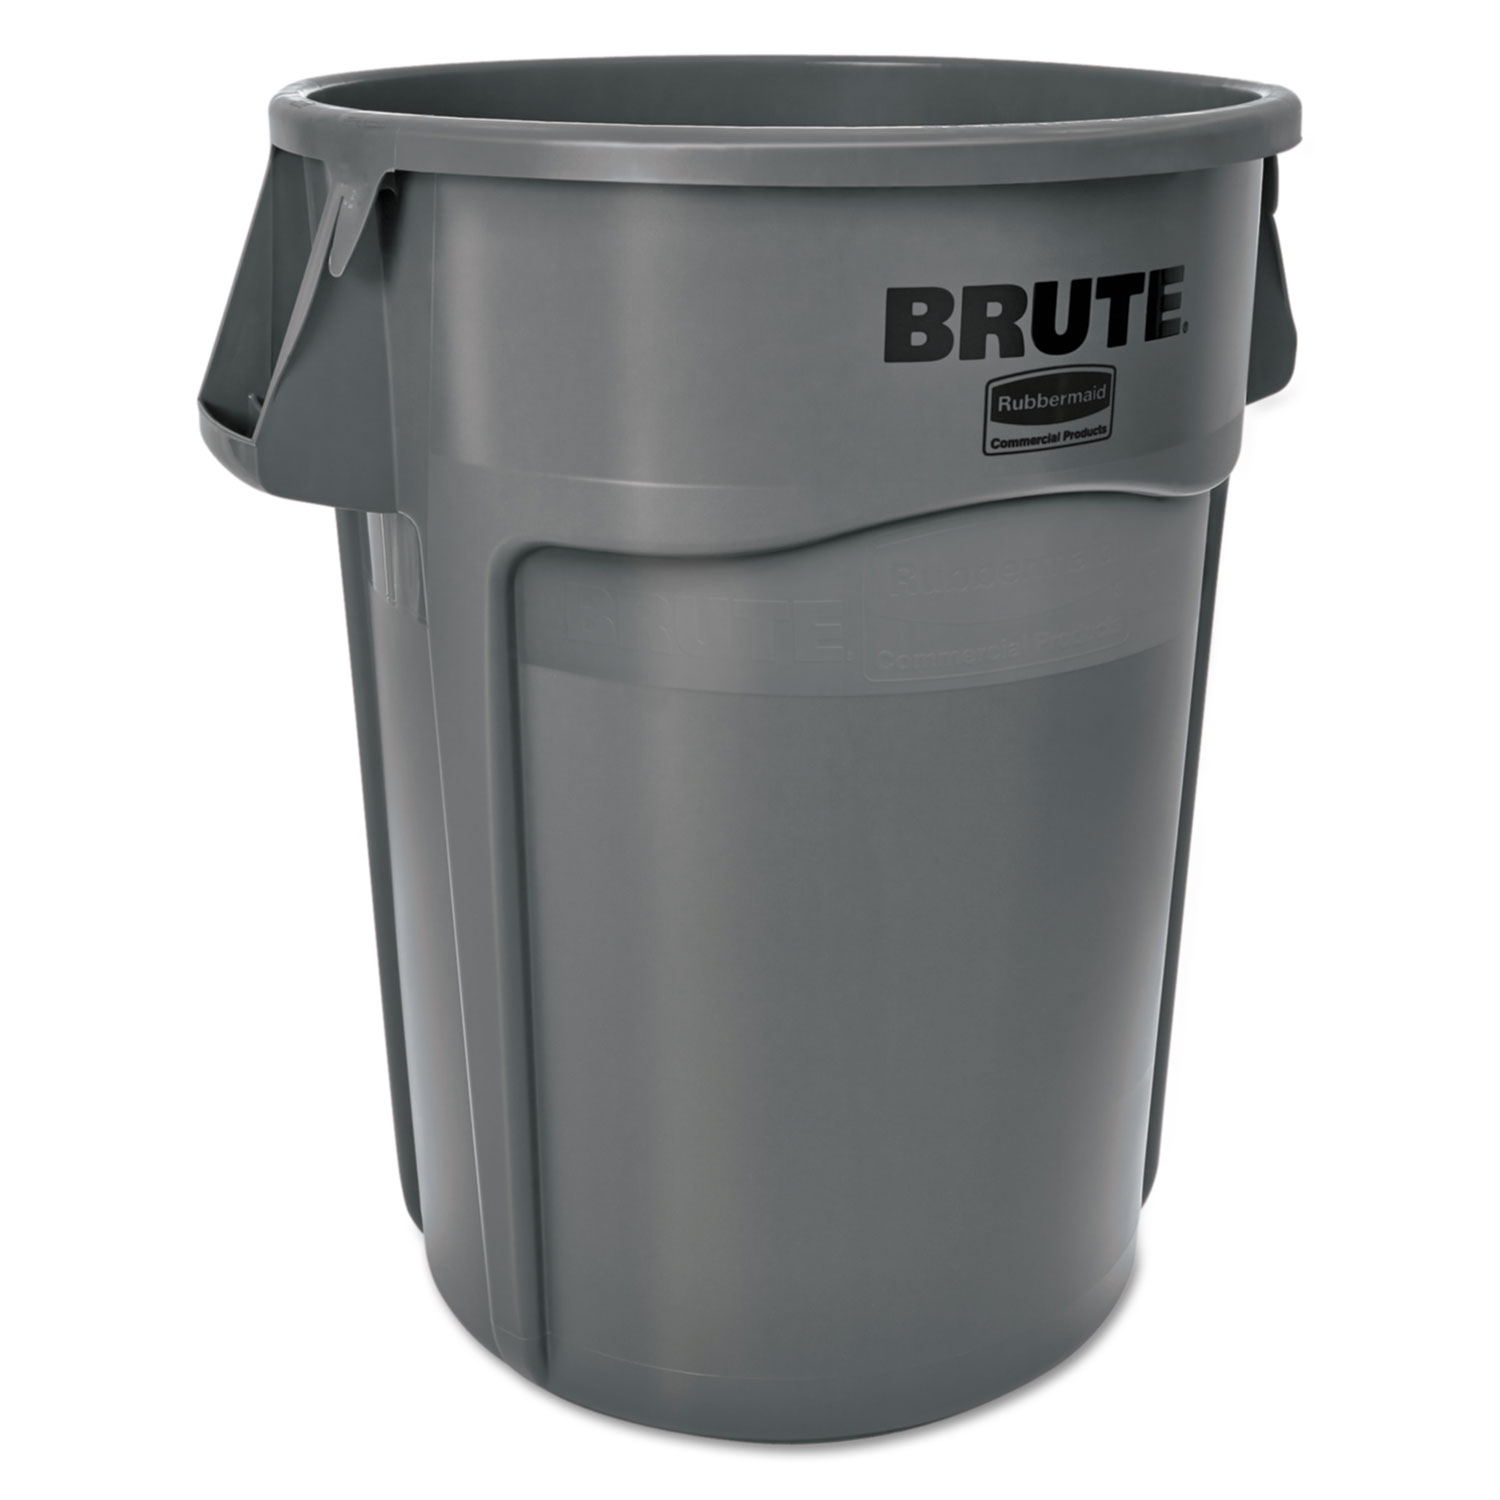 Rubbermaid RCP265500GY Commercial Round Brute Container, Plastic, 55 gal, Gray